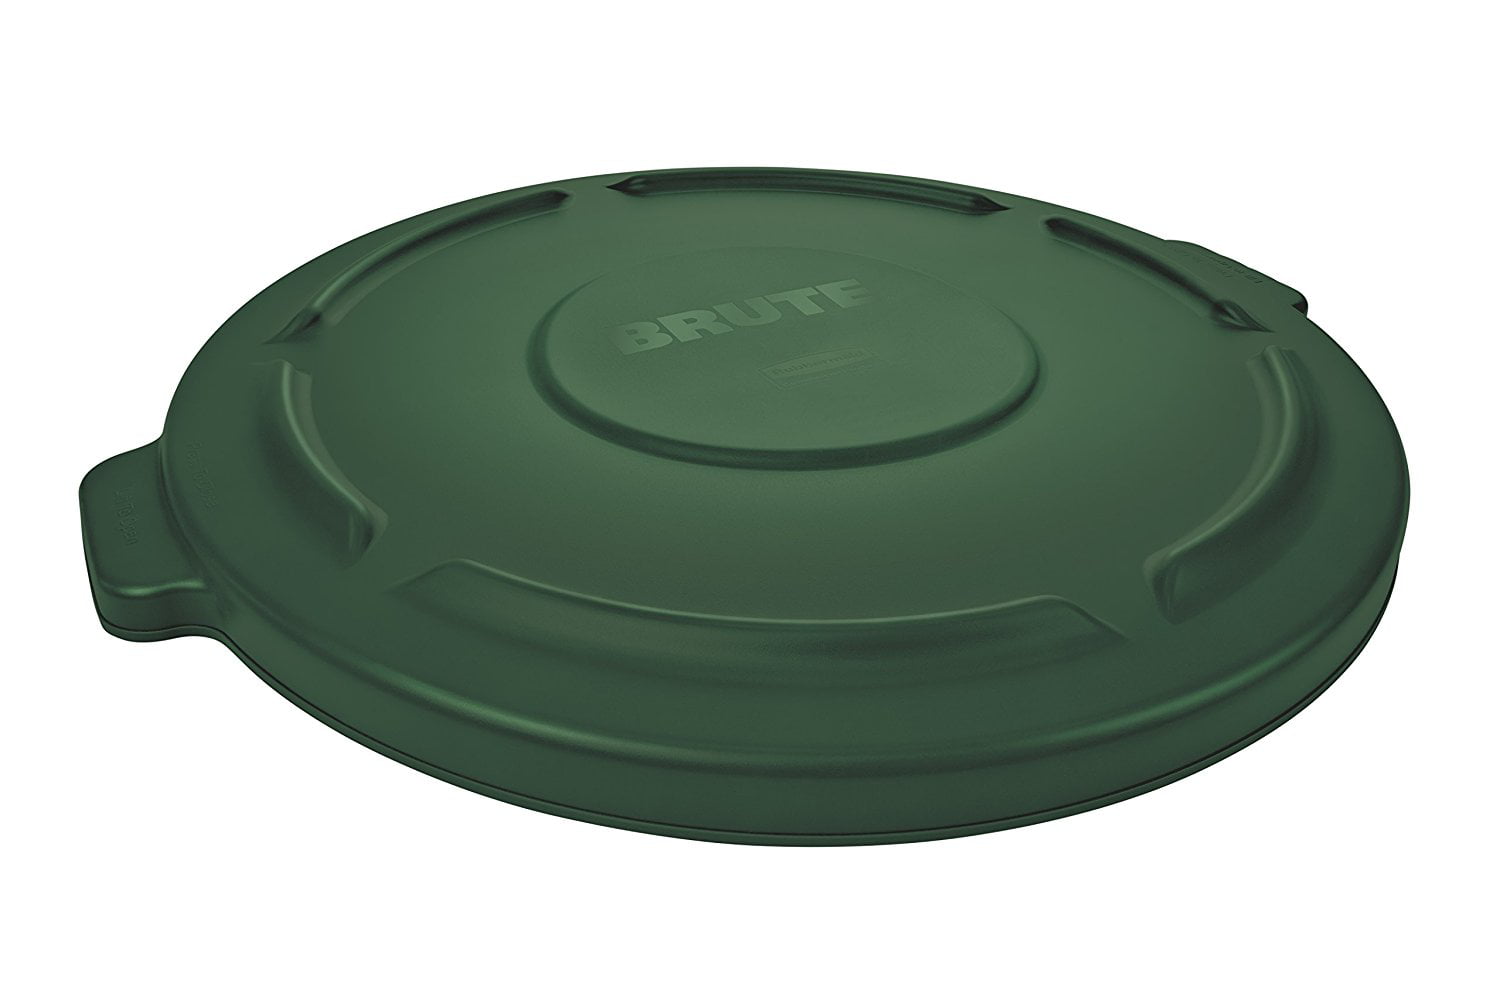 Rubbermaid Commercial Brute Plastic Waste Lid, Round, for 2620 Brute Containers, 19.88" Diameter